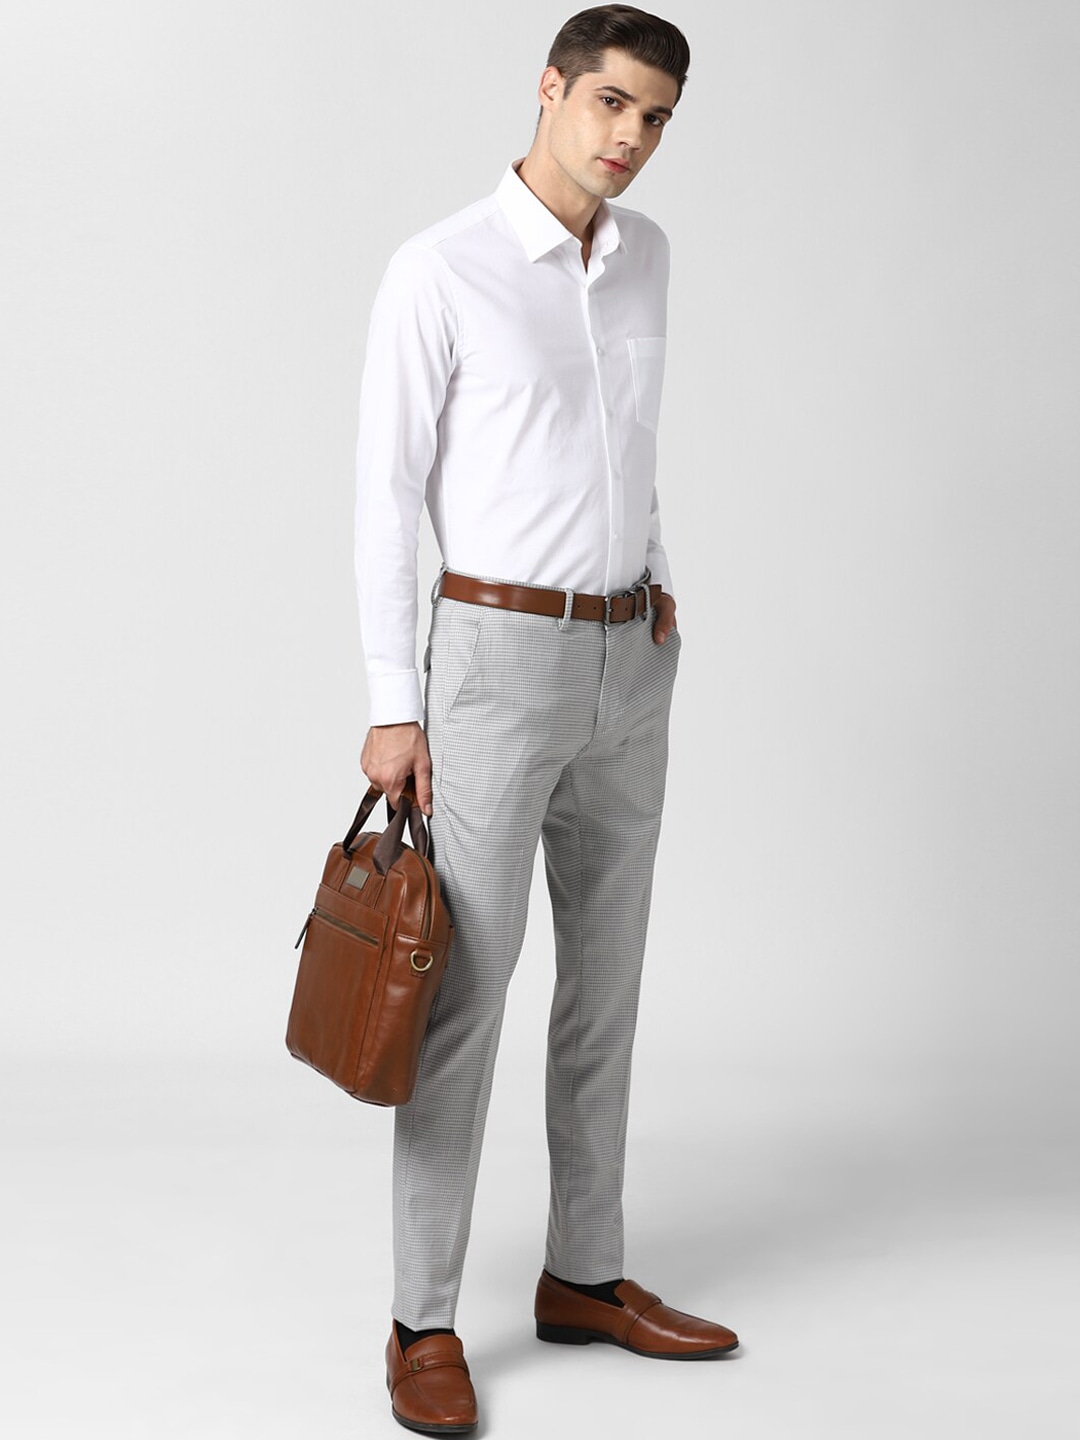 What Color Pants Go With a Grey Shirt  Bellatory